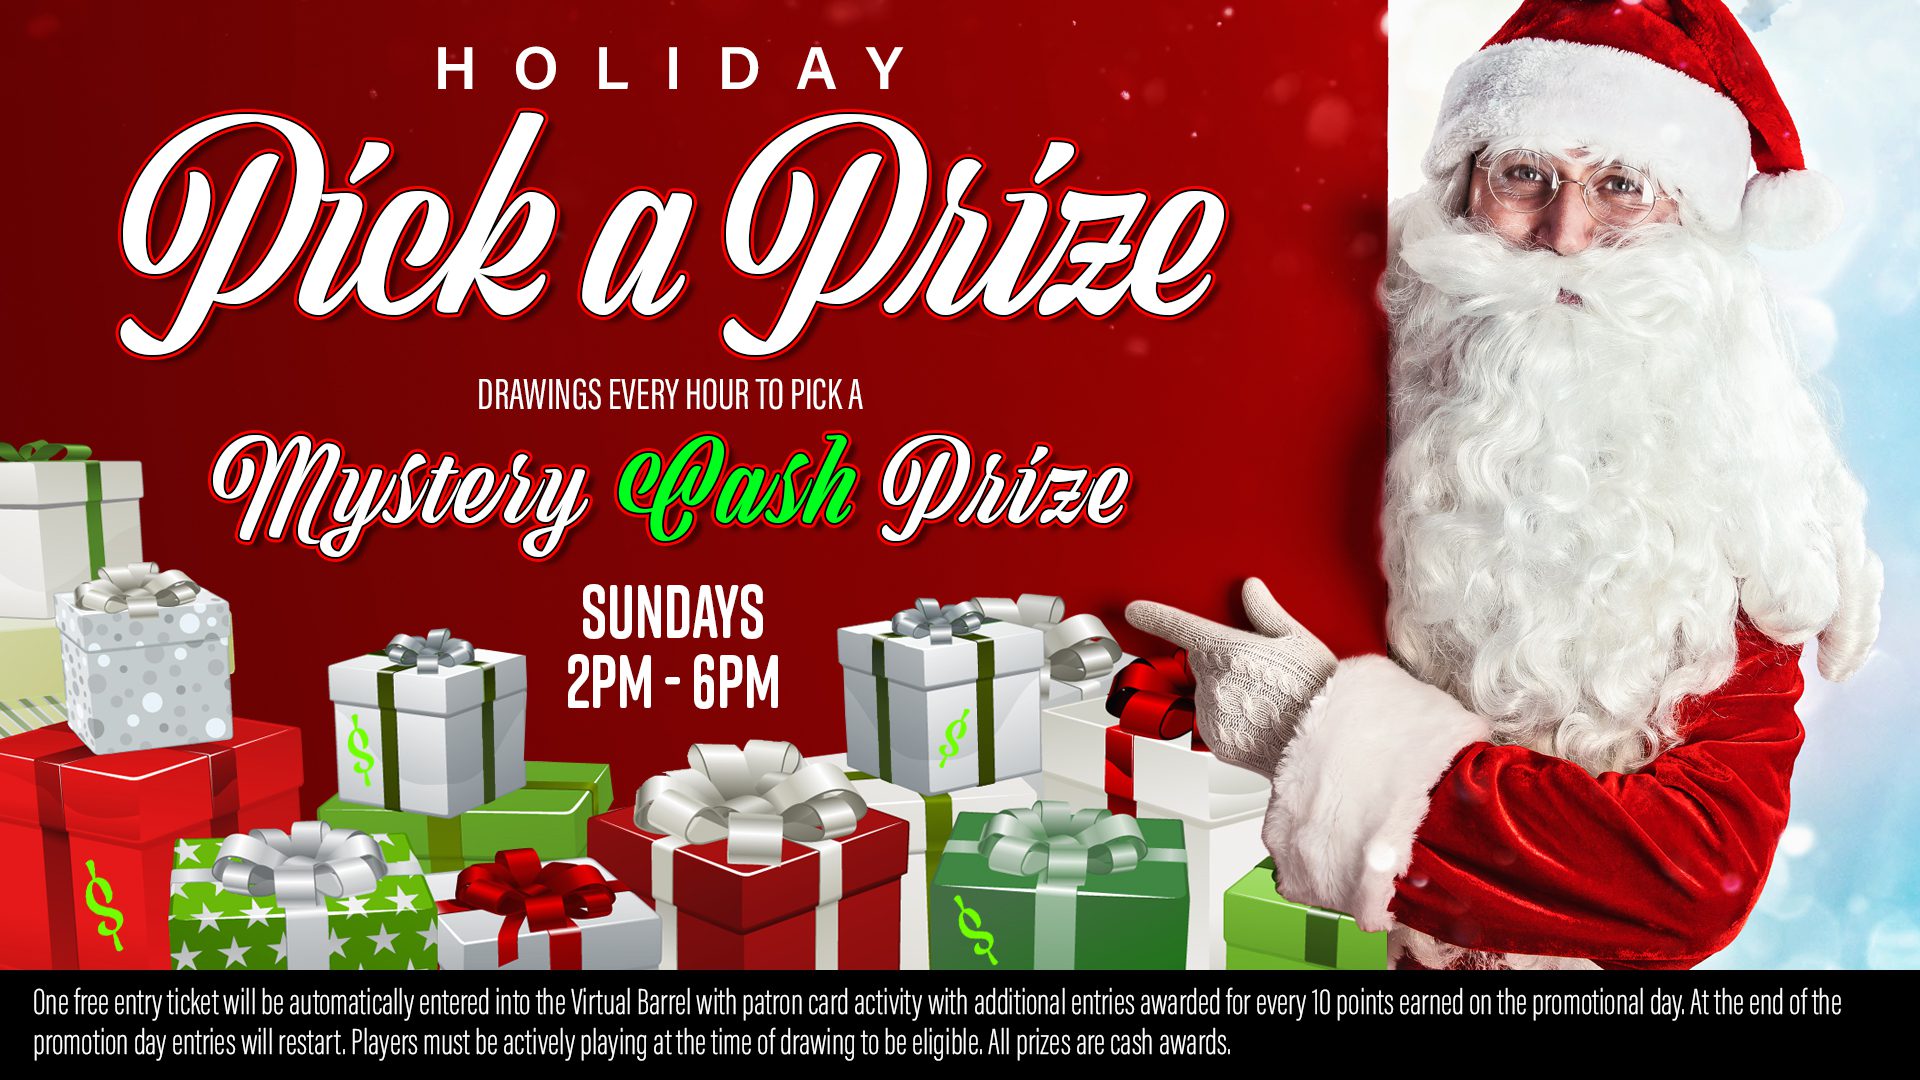 Santa claus promoting a 'pick a prize' holiday event with mystery cash prizes and hourly drawings.